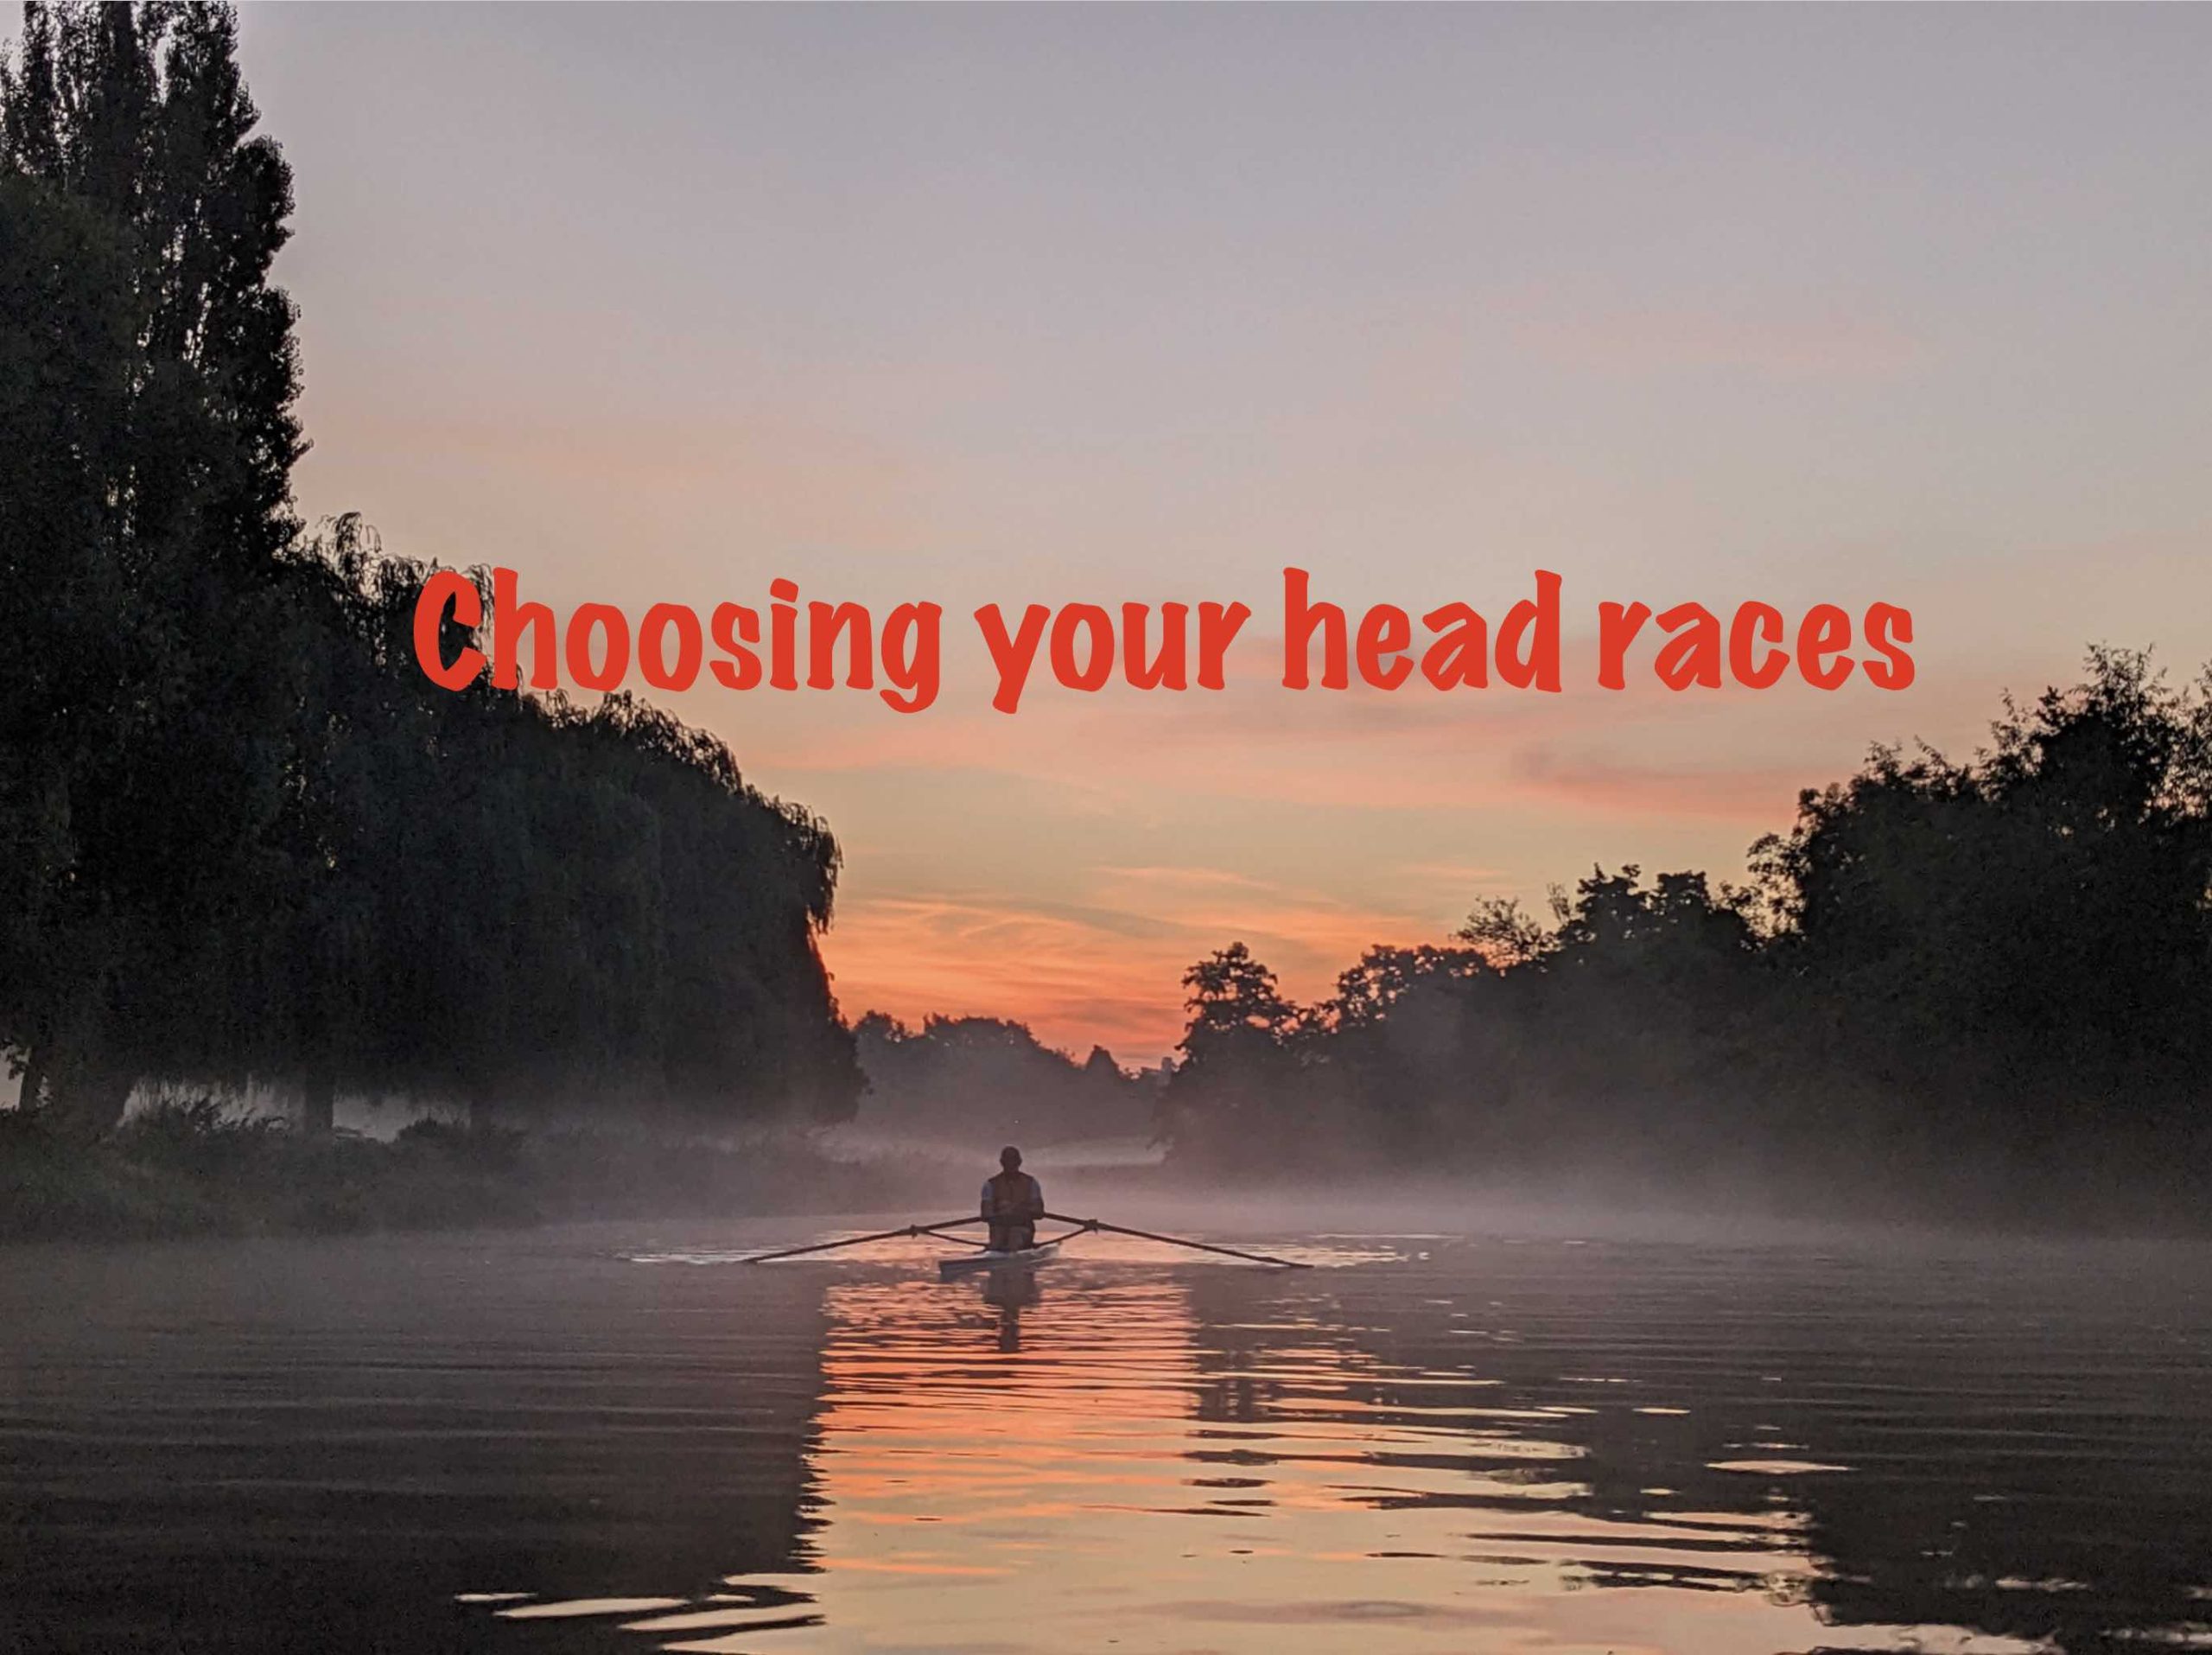 rowing head race, beautiful sunrise river with rowing boat single sculler